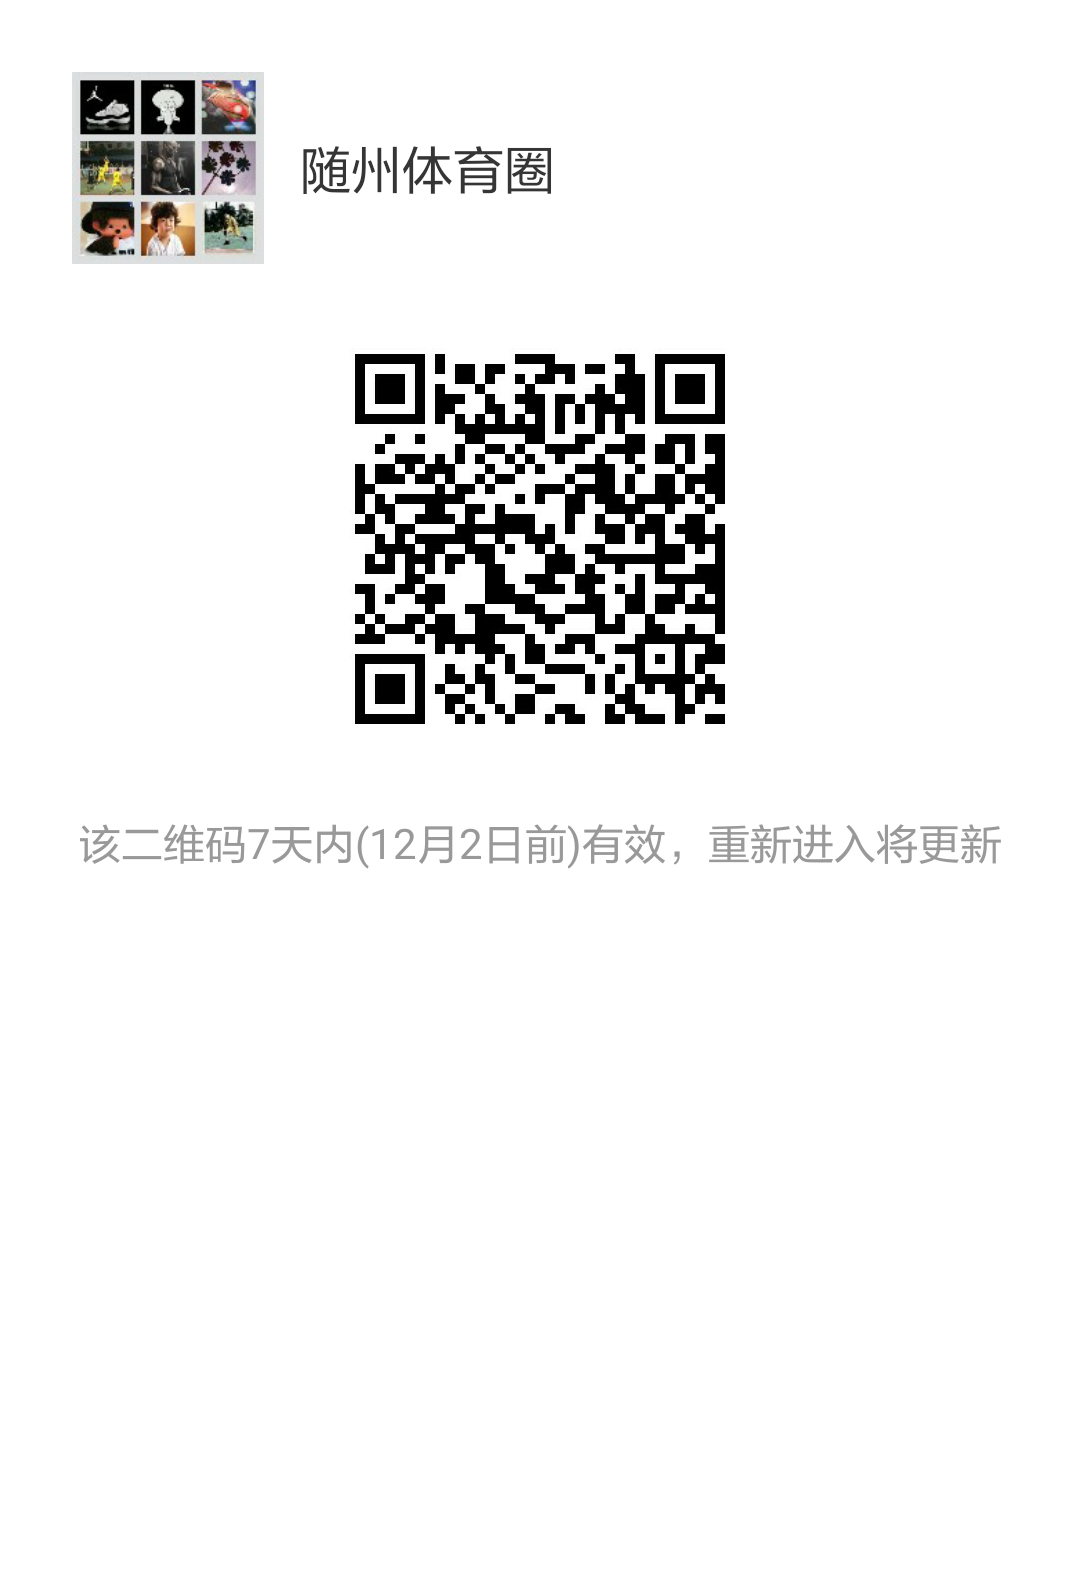 mmqrcode1480038935022.png